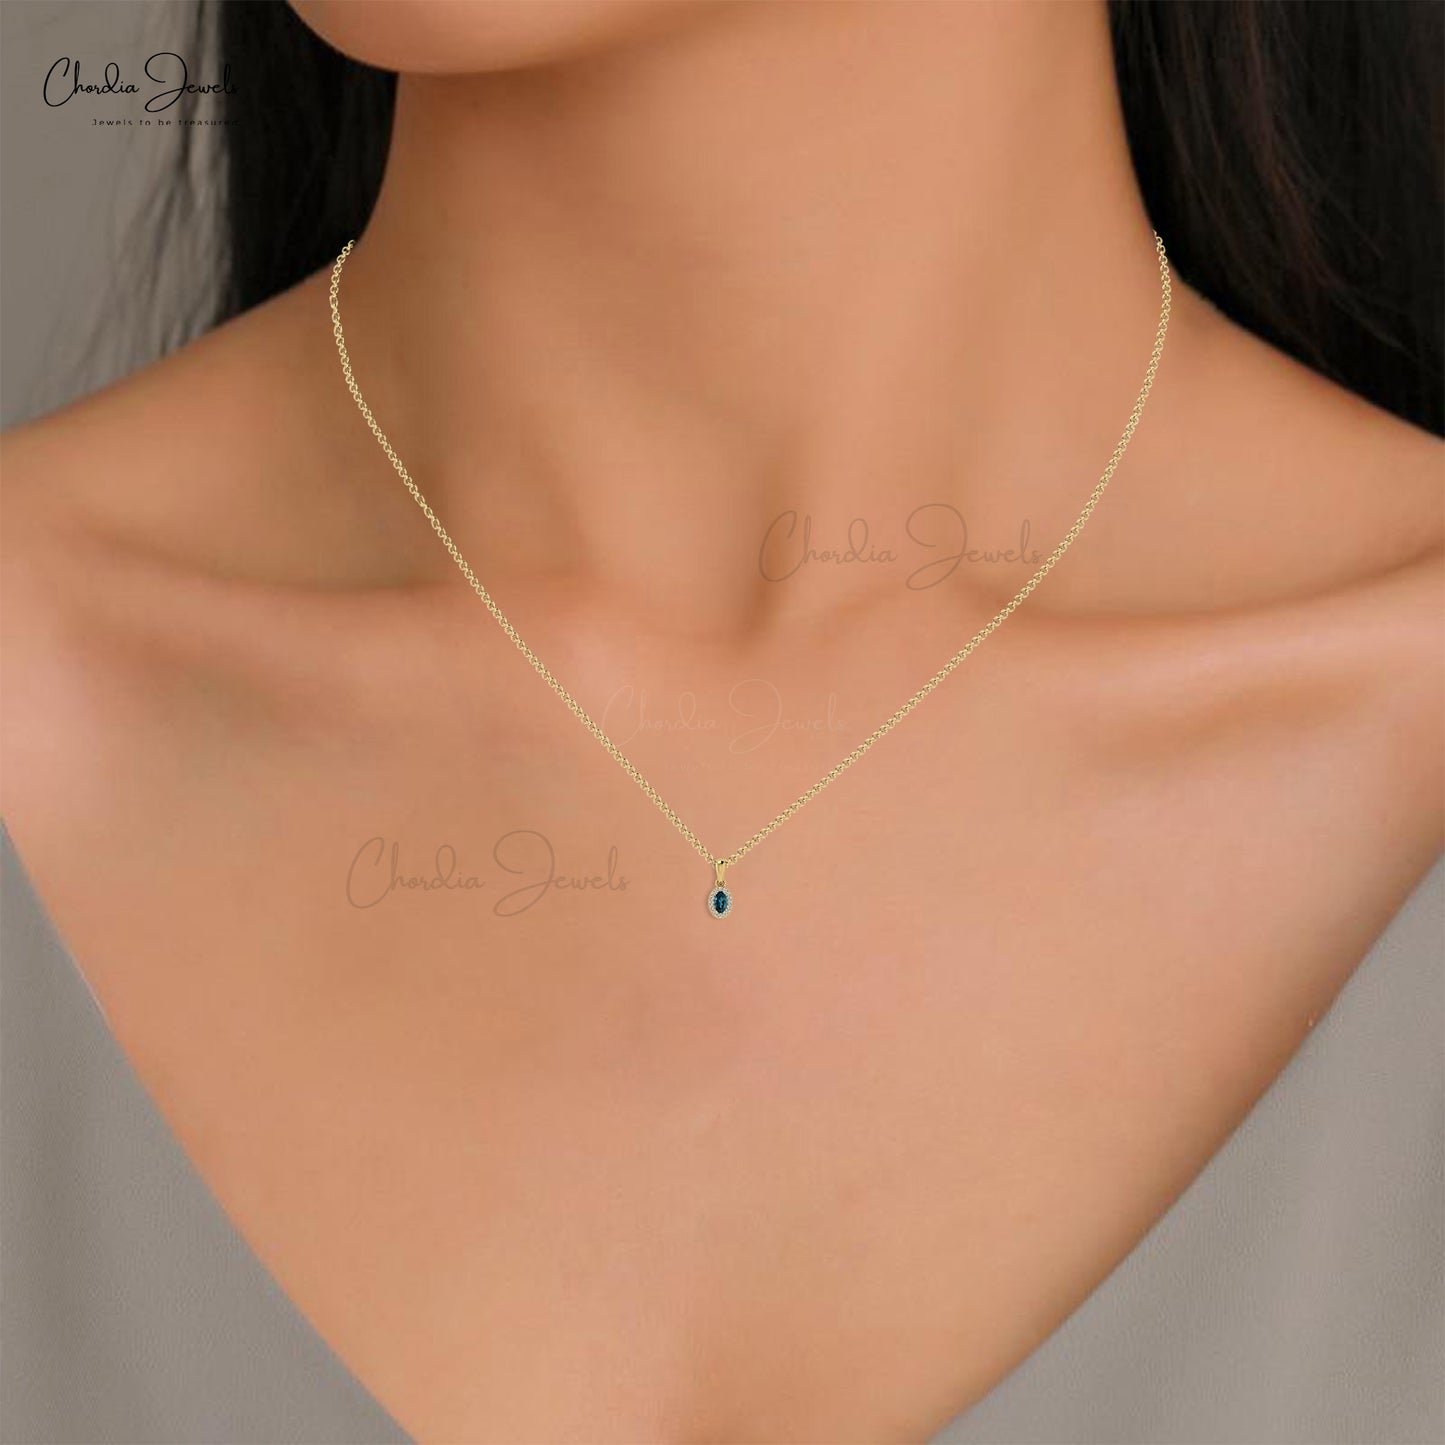 Natural 5x3mm London Blue Topaz and White Diamond Halo Pendant Necklace 14k Solid Gold Minimalist Jewelry For Wedding Gift